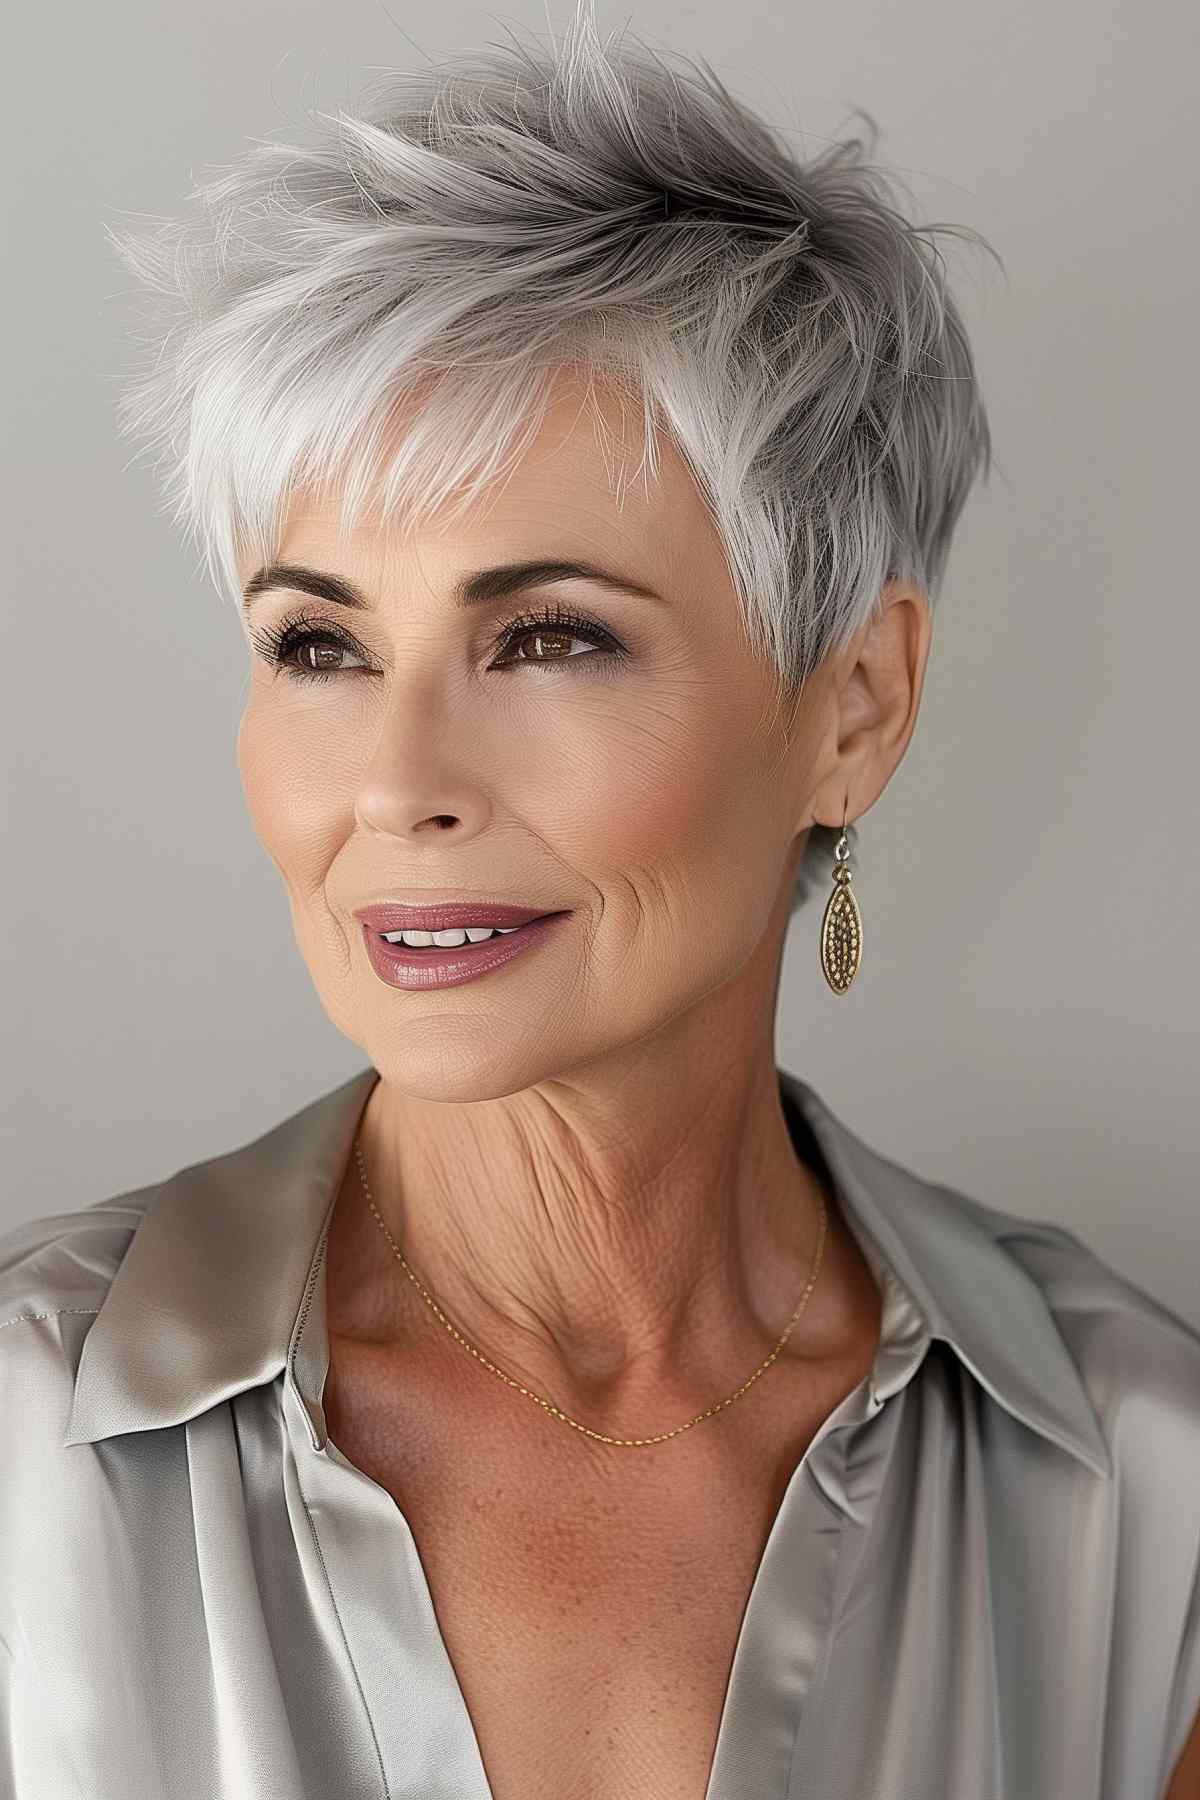 Elegant short layered pixie cut on a woman over 50 with stylish silver hair.